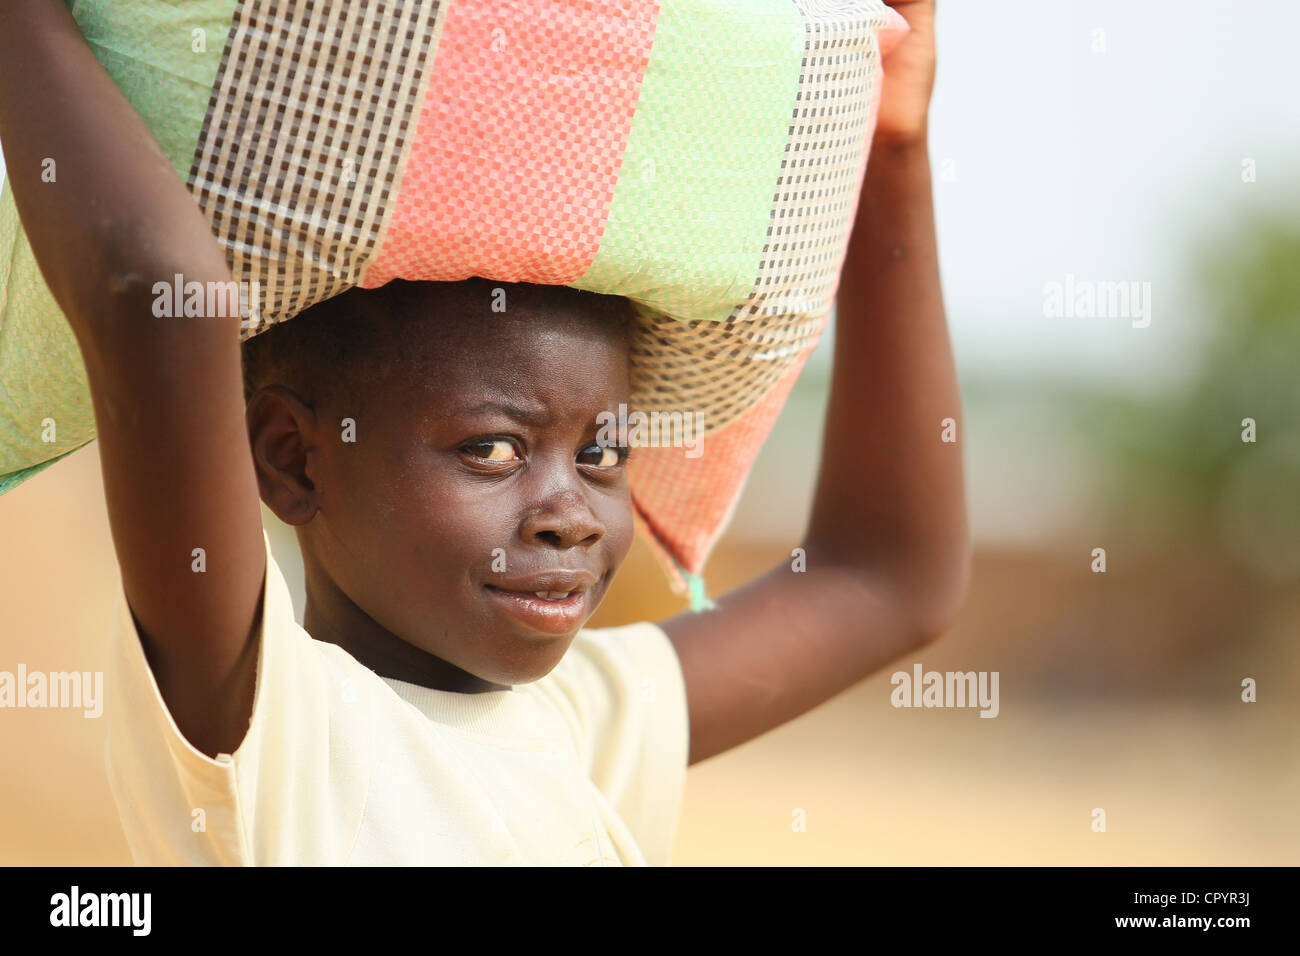 A girl carries a load on top of her head in N'Djamena, Chad on Thursday June 10, 2010. Stock Photo